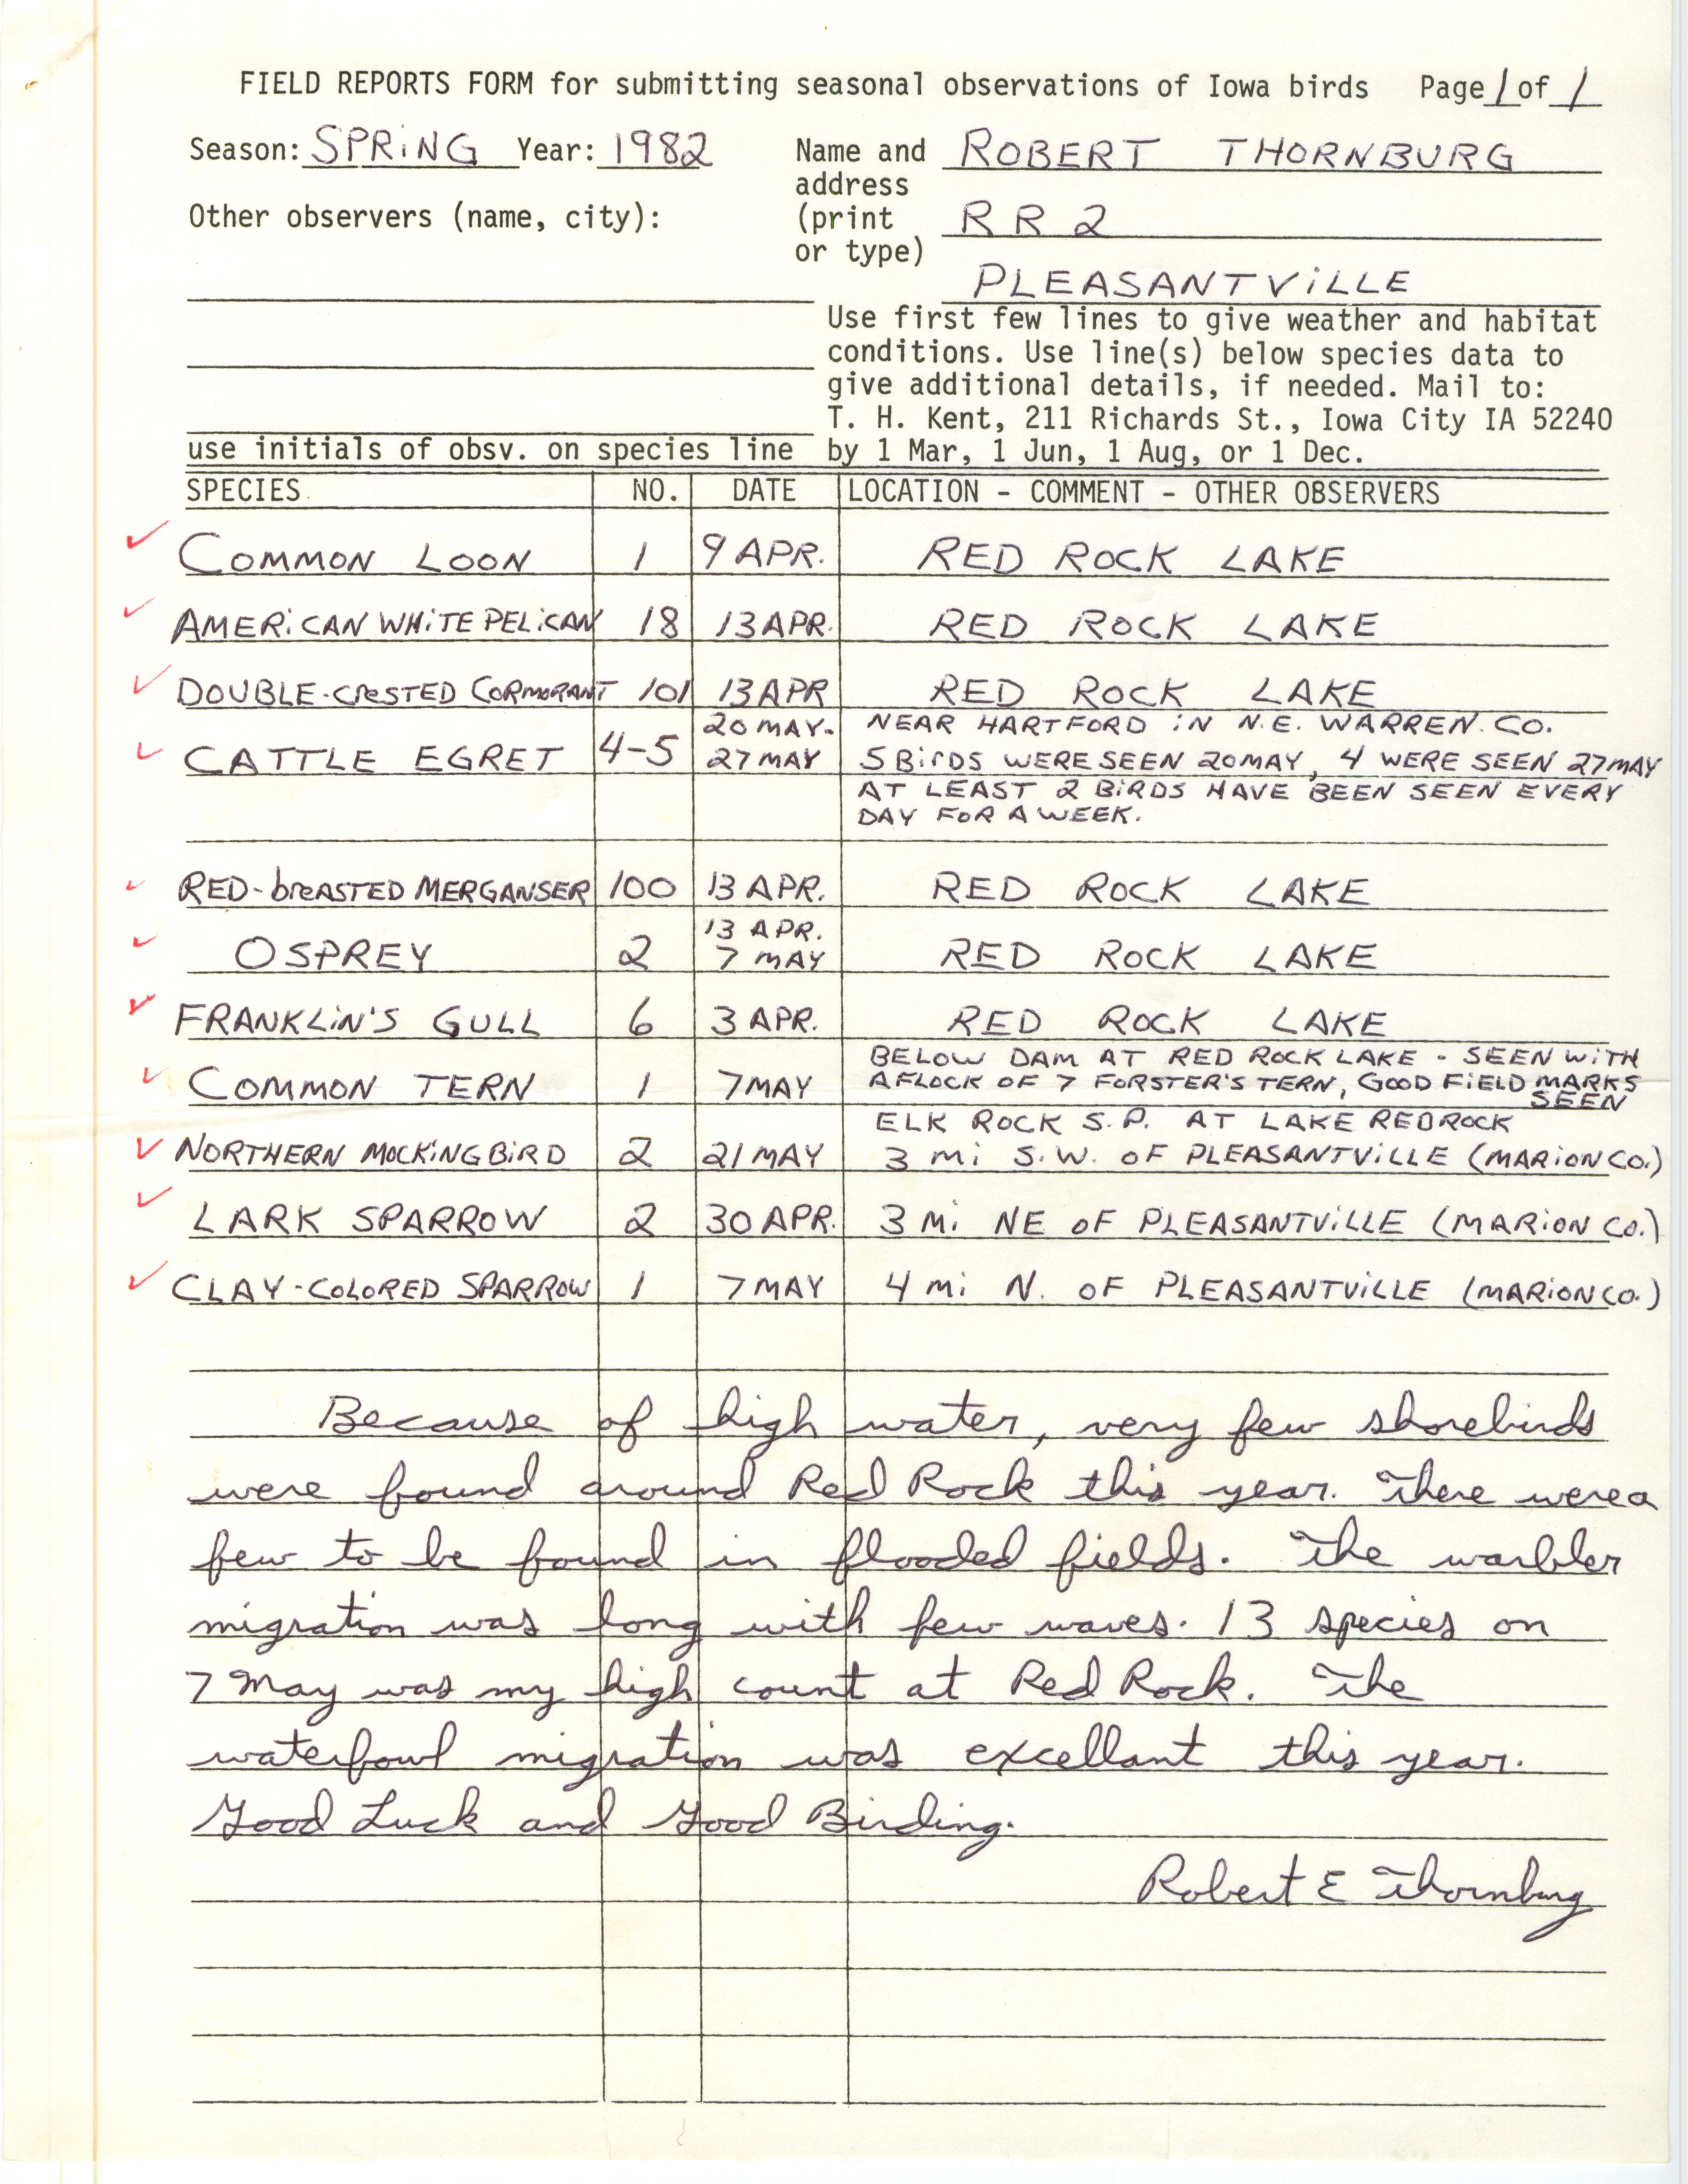 Field notes contributed by Robert E. Thornburg, spring 1982